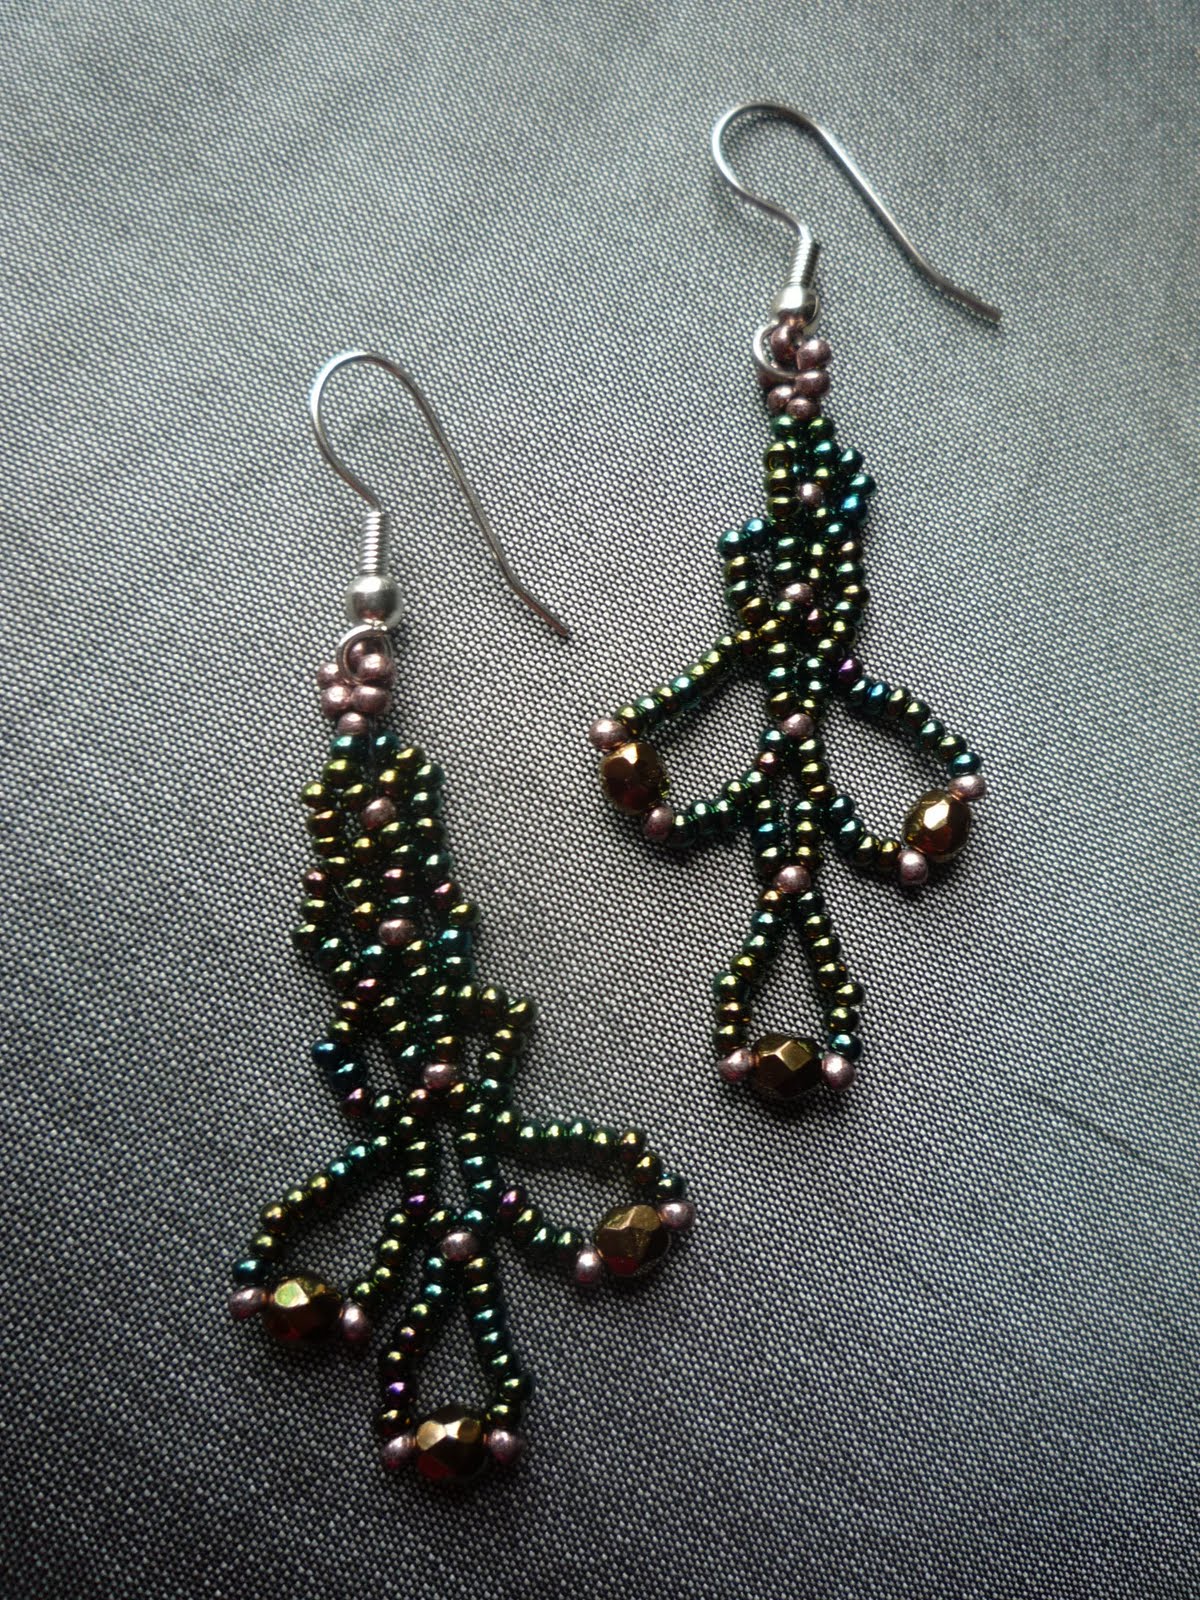 Bead Earring Designs-Bead Earring Designs Manufacturers, Suppliers